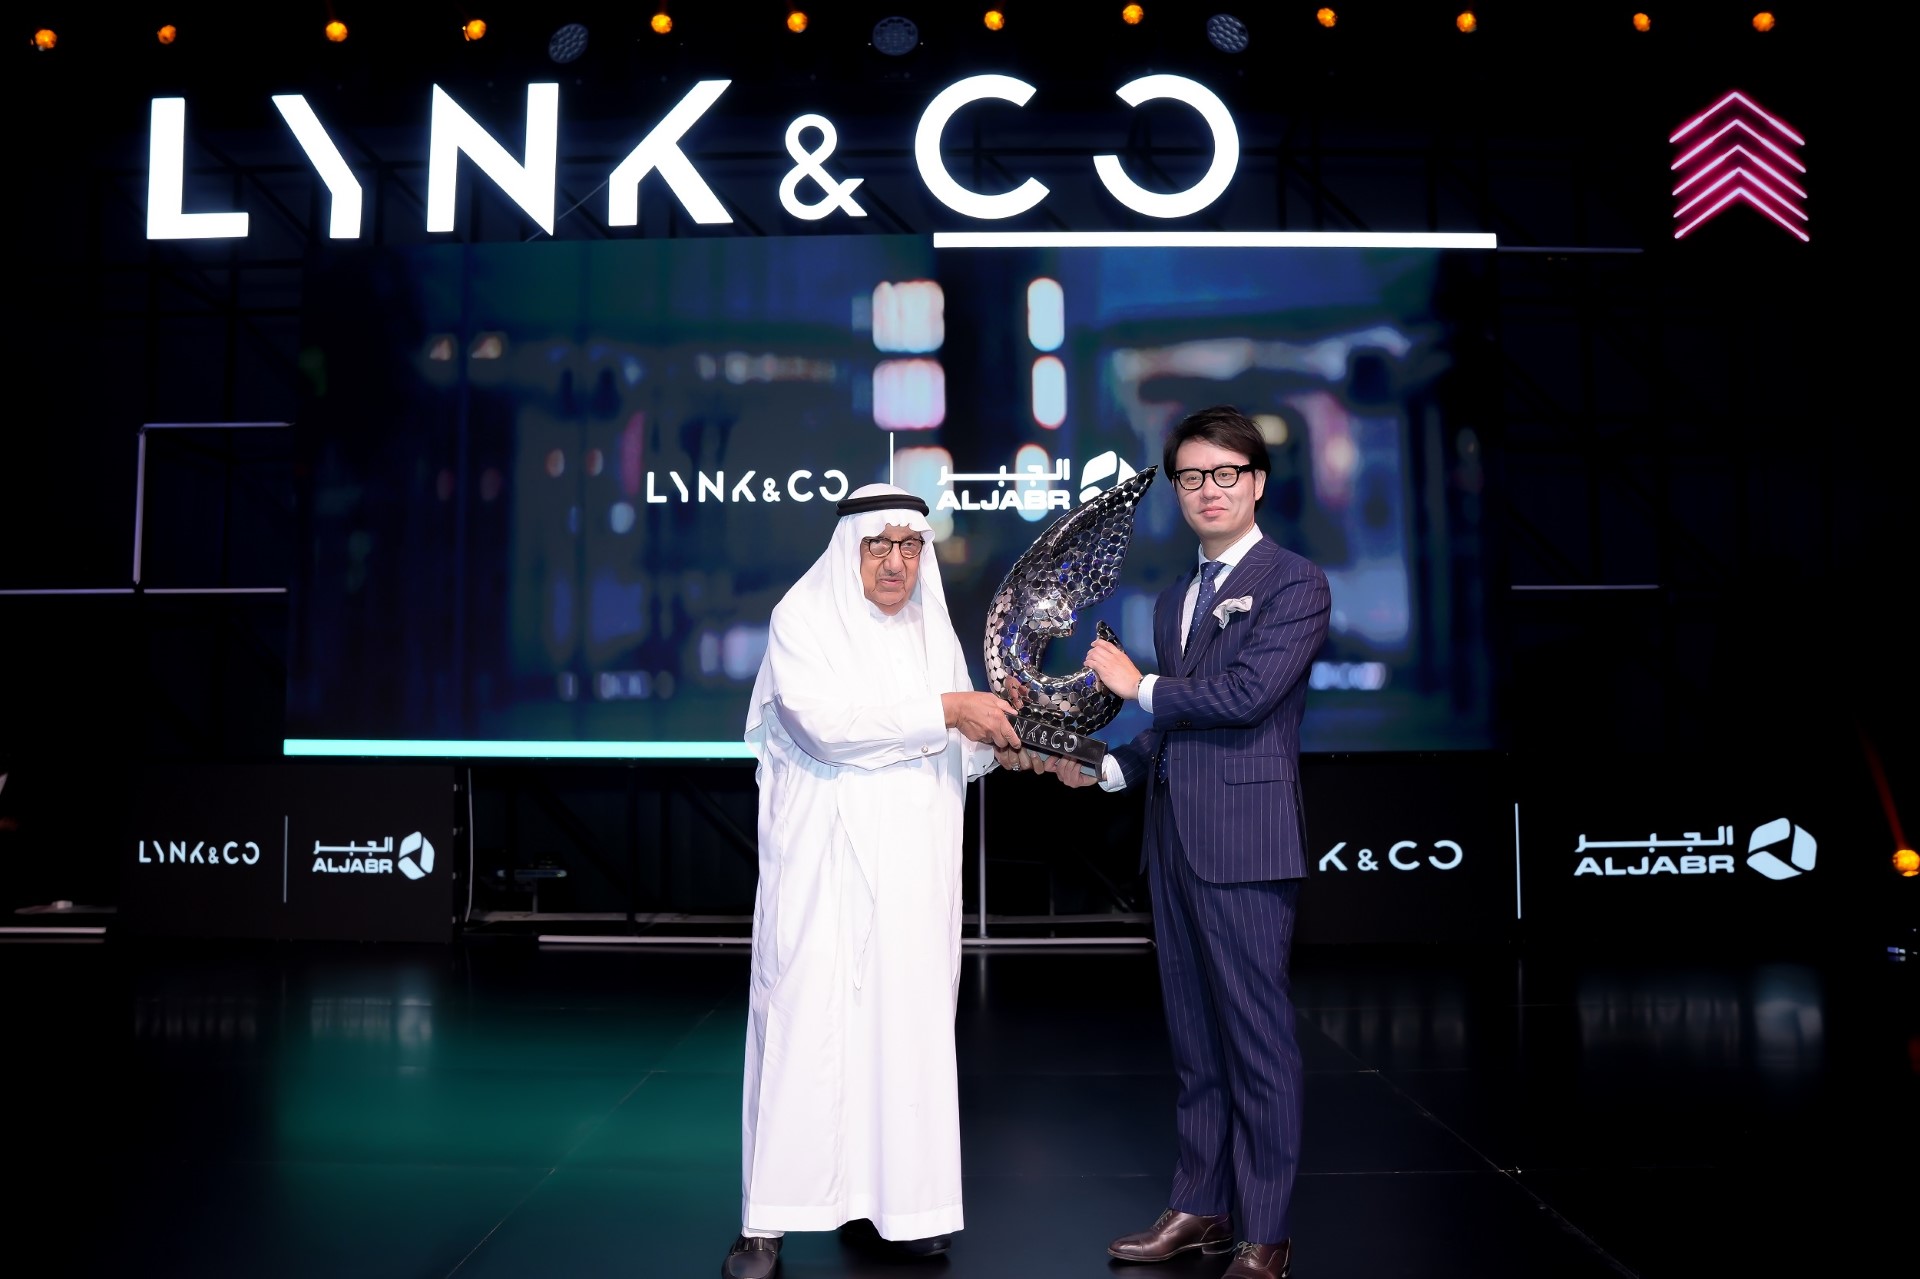 Luxury Lynk & Co’s vehicles are Officially Launched in Premium Lynk & Co’s vehicles are Officially Launched in the Kingdom After Aljabr Got Its Dealership at the End of Last Year